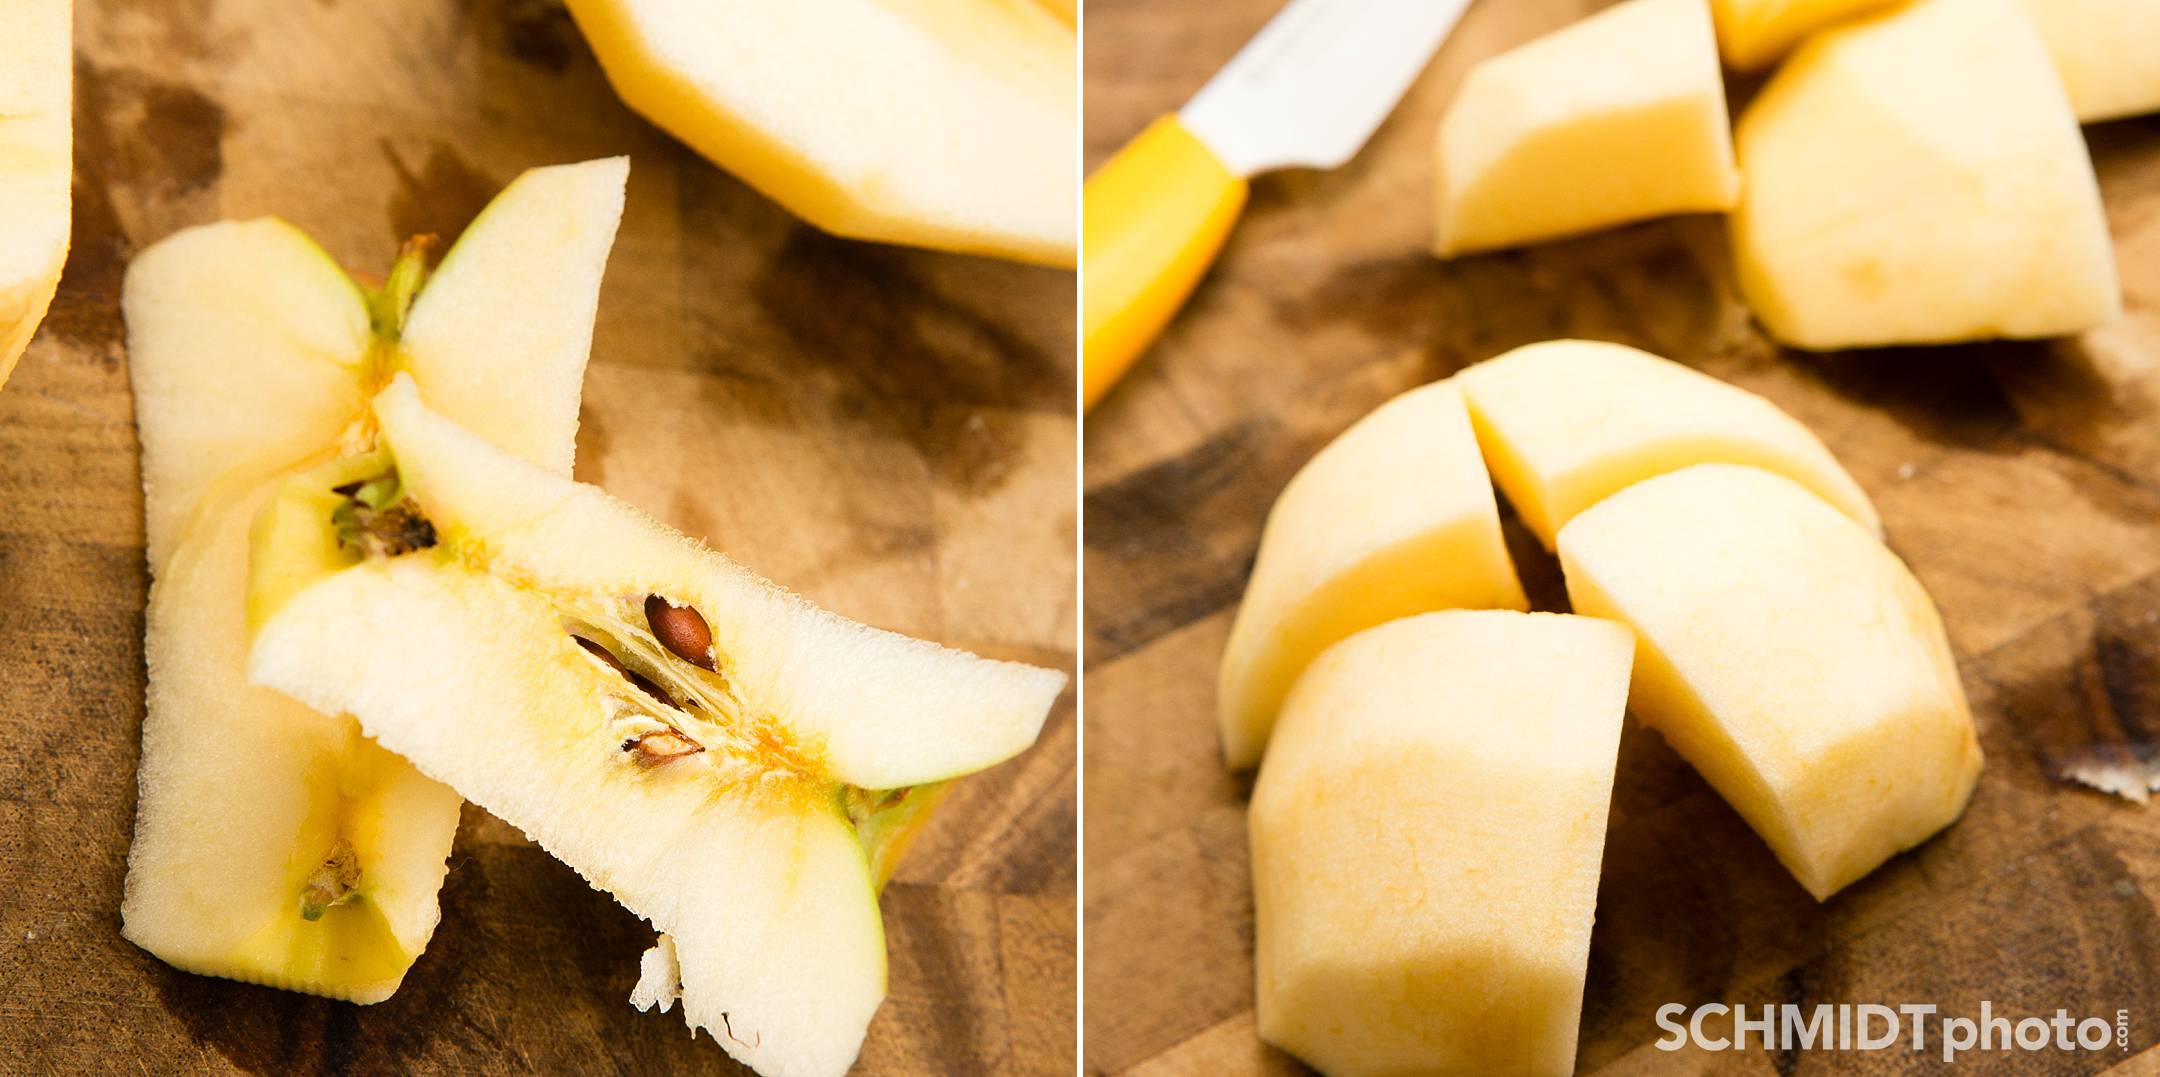 How to cut up apples for homemade applesauce easy